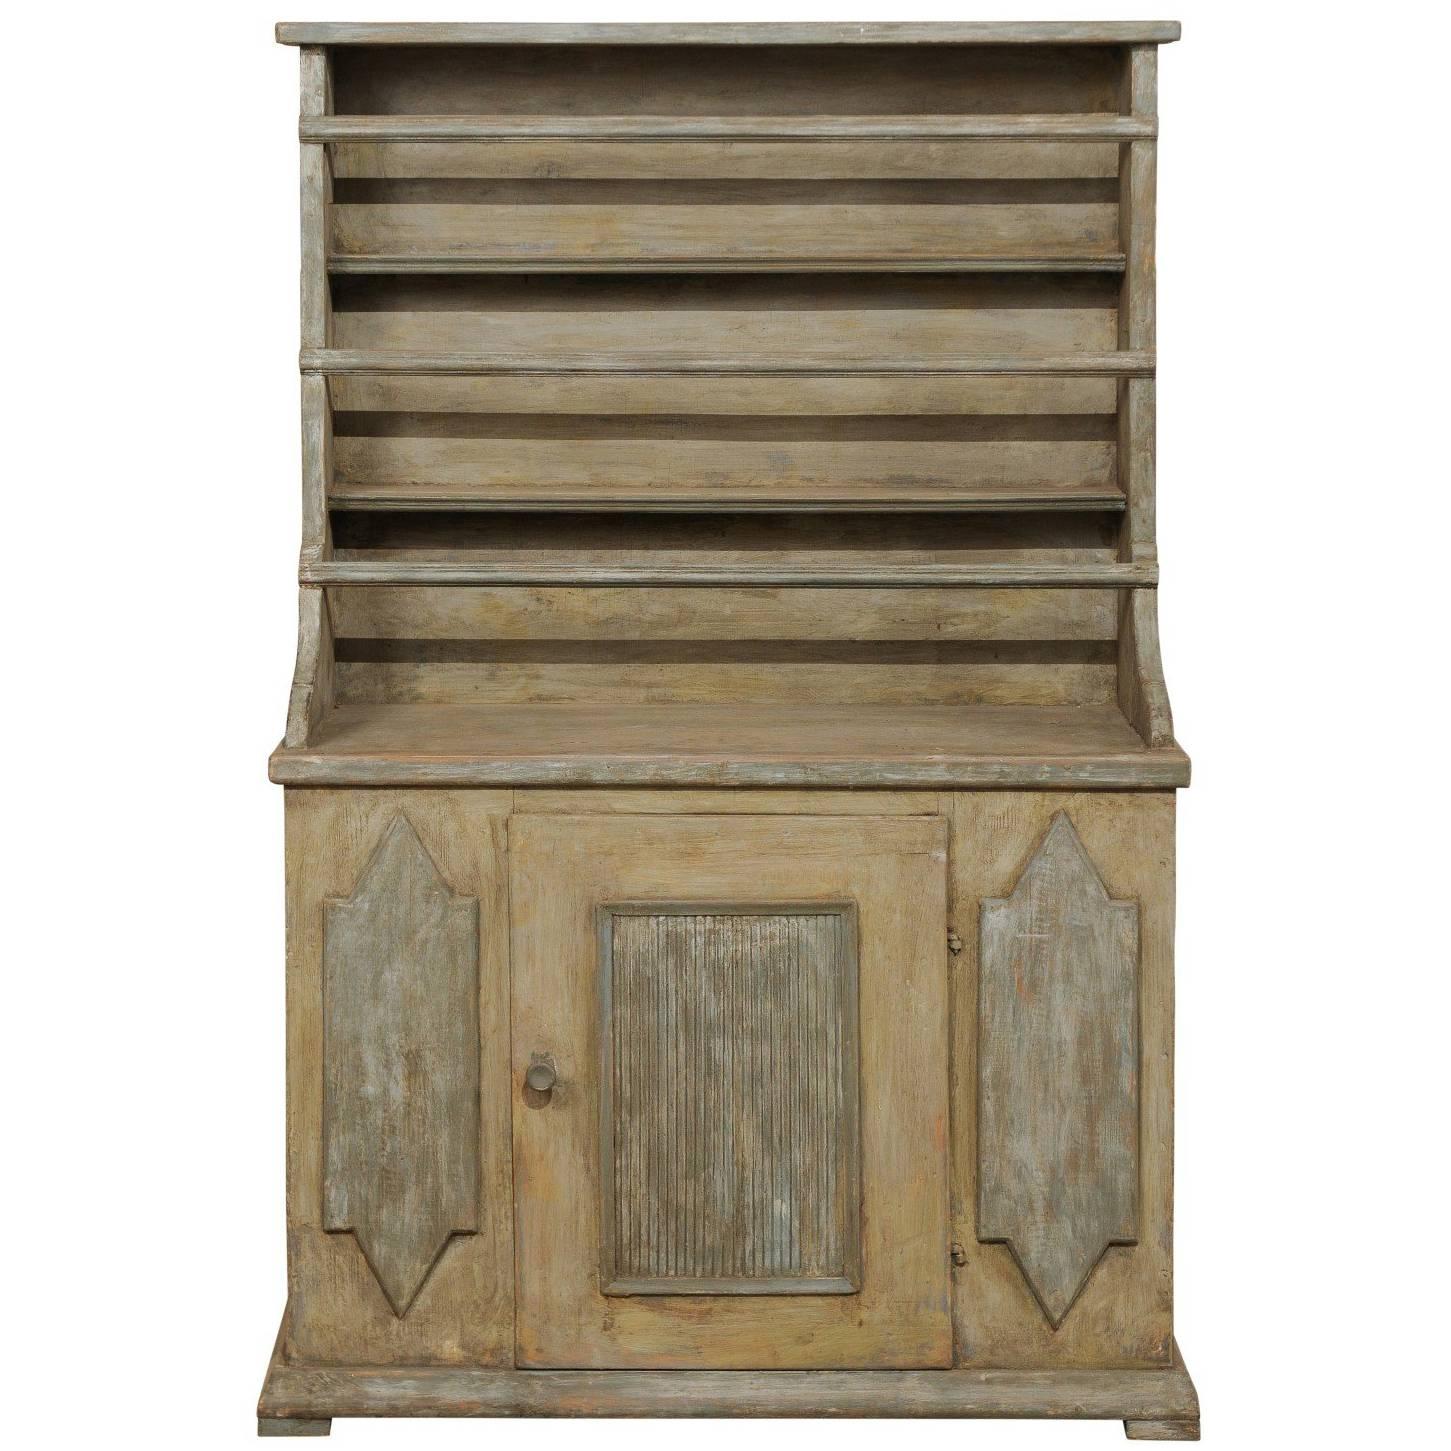 19th Century Period Gustavian, Swedish Painted Wood Cabinet with Plate Rack